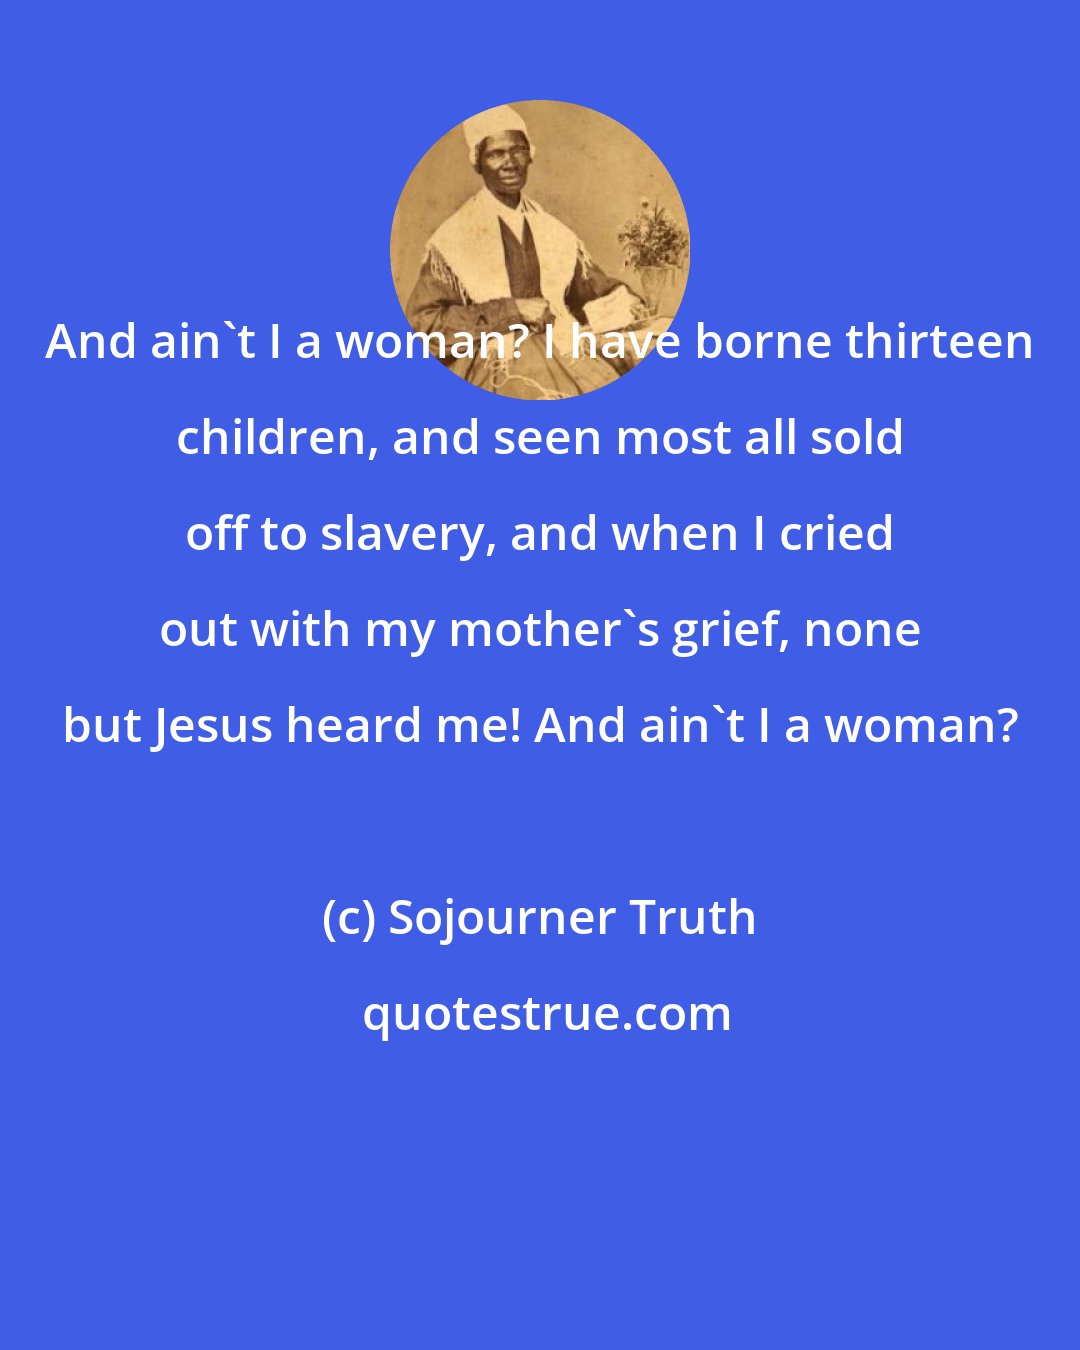 Sojourner Truth: And ain't I a woman? I have borne thirteen children, and seen most all sold off to slavery, and when I cried out with my mother's grief, none but Jesus heard me! And ain't I a woman?